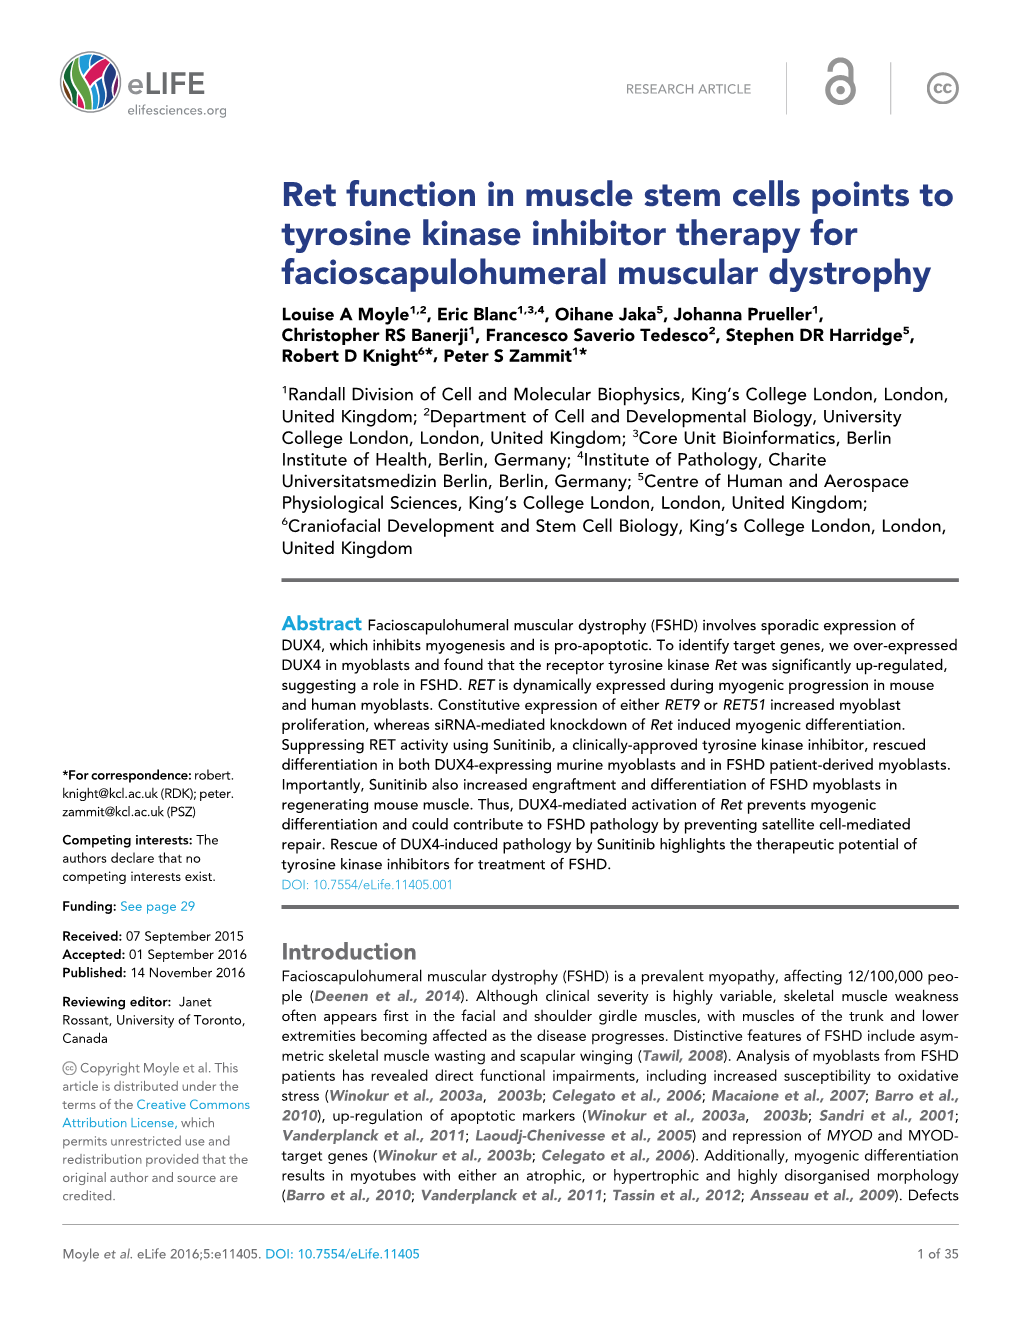 Ret Function in Muscle Stem Cells Points to Tyrosine Kinase Inhibitor